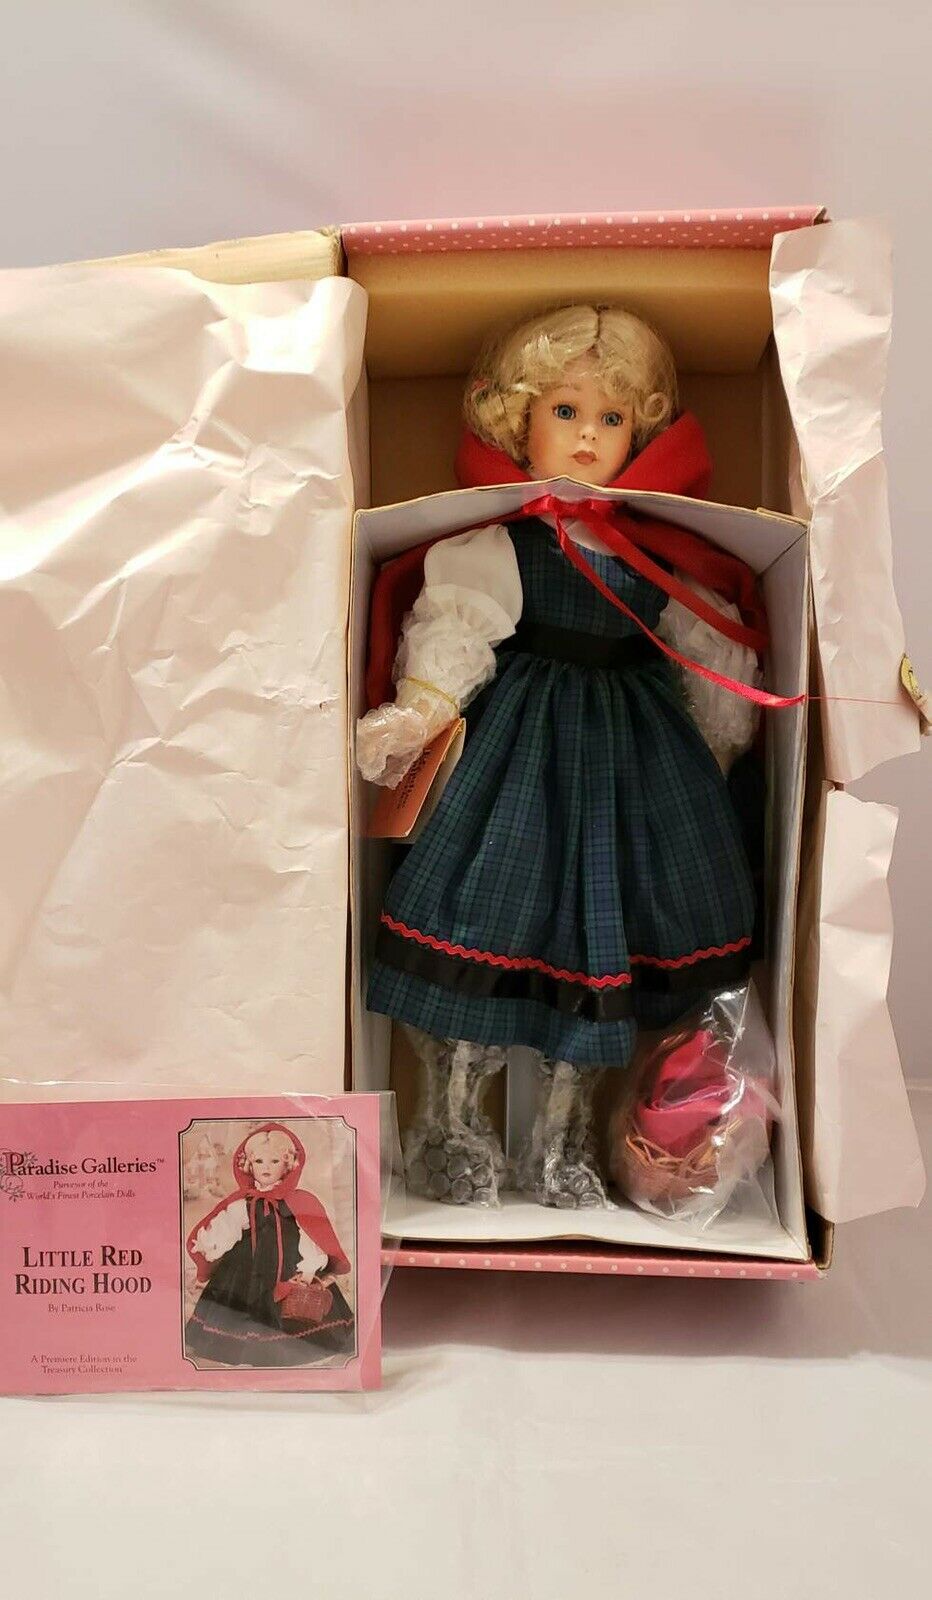 Treasury Collection Paradise Galleries Doll Little Red Riding Hood *nob*